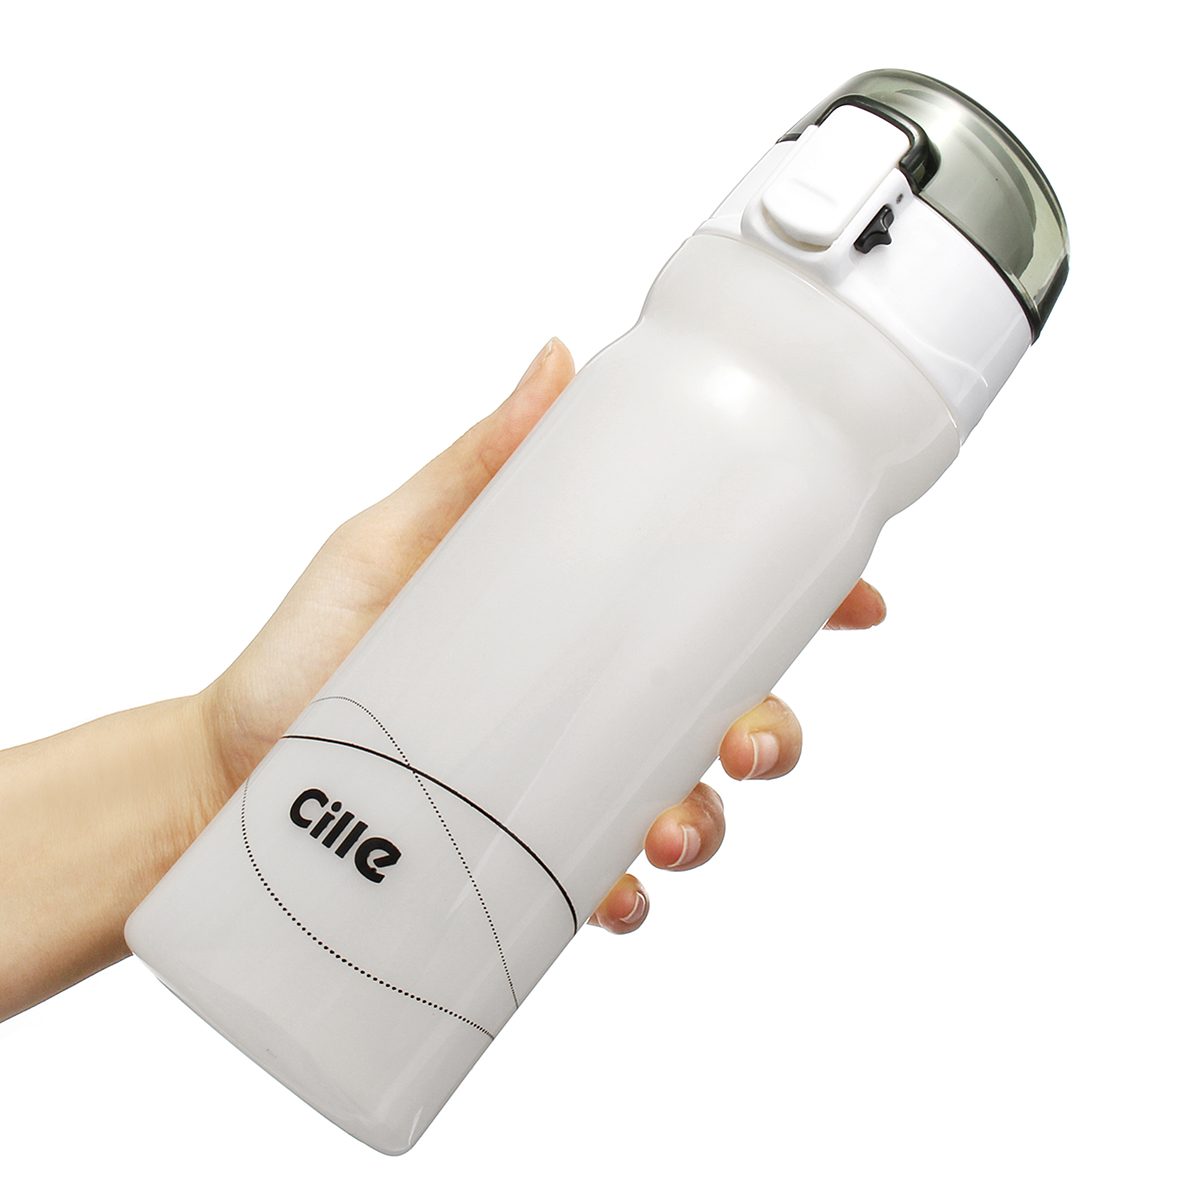 600ml20oz-High-quality-Food-Grade-Water-Bottle-for-long-hikes-trekking-hot-yoga-class-long-load-trip-1523049-6